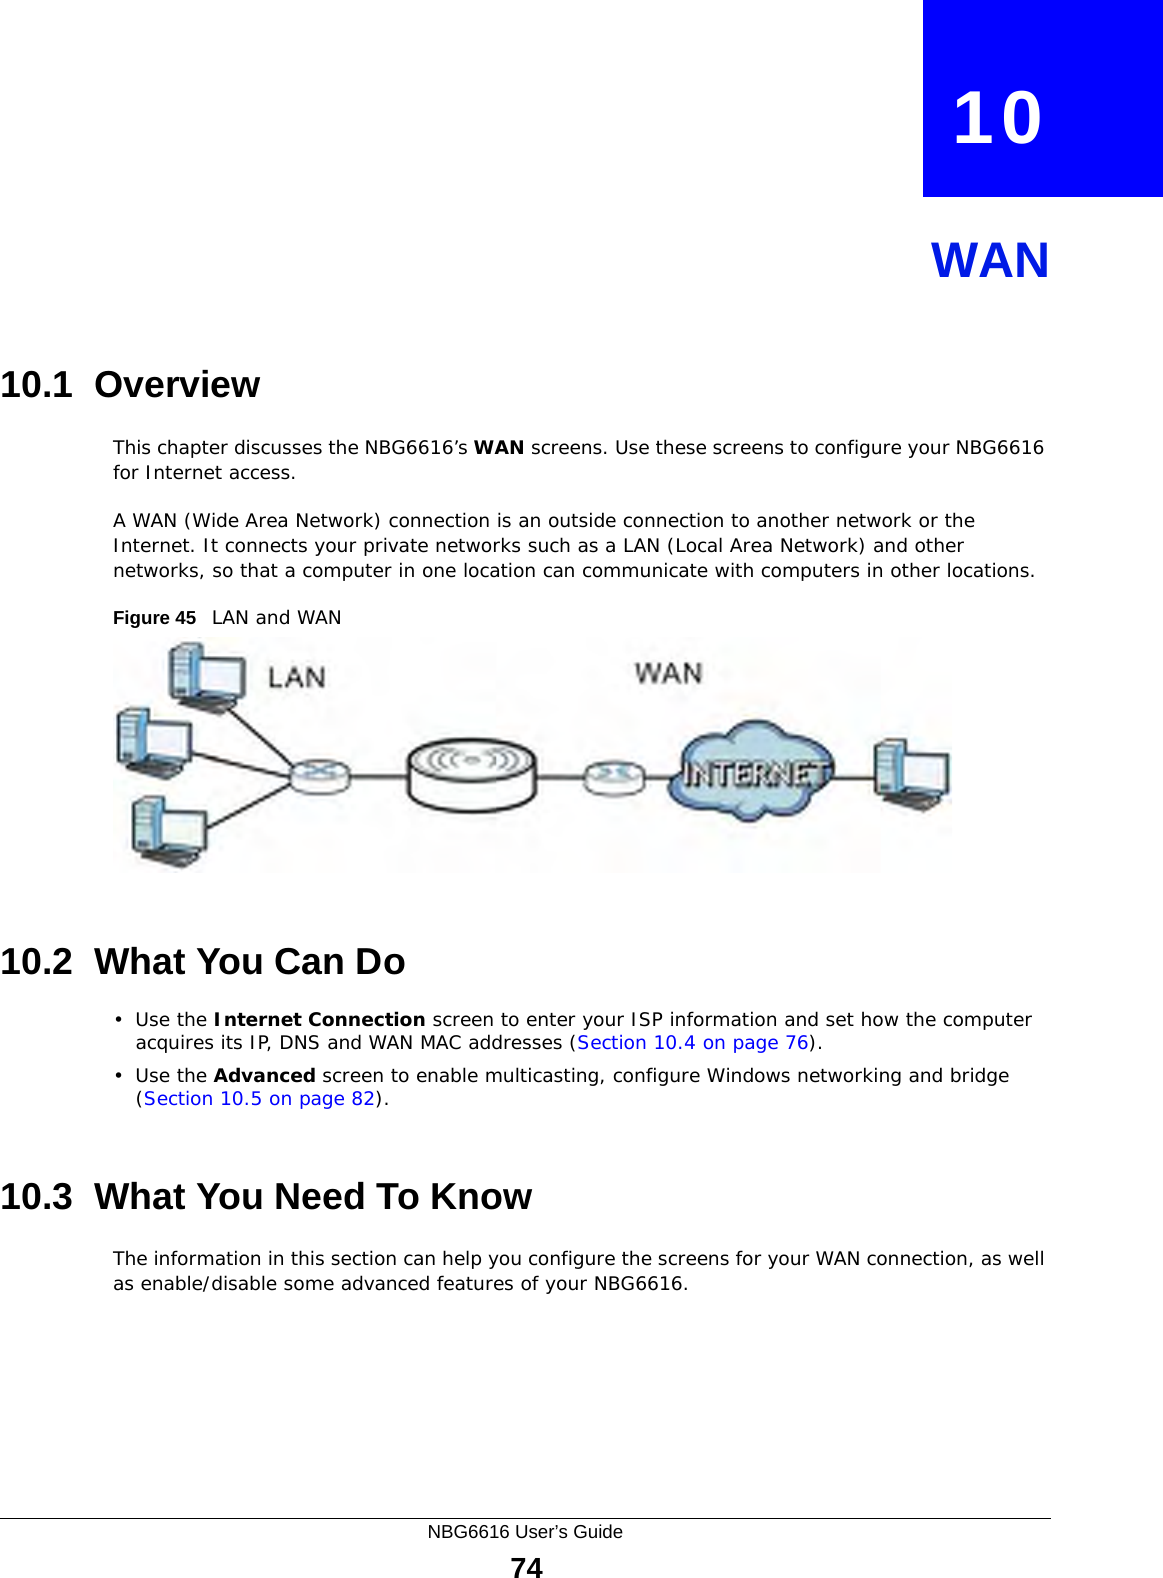 NBG6616 User’s Guide74CHAPTER   10WAN10.1  OverviewThis chapter discusses the NBG6616’s WAN screens. Use these screens to configure your NBG6616 for Internet access.A WAN (Wide Area Network) connection is an outside connection to another network or the Internet. It connects your private networks such as a LAN (Local Area Network) and other networks, so that a computer in one location can communicate with computers in other locations.Figure 45   LAN and WAN10.2  What You Can Do•Use the Internet Connection screen to enter your ISP information and set how the computer acquires its IP, DNS and WAN MAC addresses (Section 10.4 on page 76).•Use the Advanced screen to enable multicasting, configure Windows networking and bridge (Section 10.5 on page 82).10.3  What You Need To KnowThe information in this section can help you configure the screens for your WAN connection, as well as enable/disable some advanced features of your NBG6616.